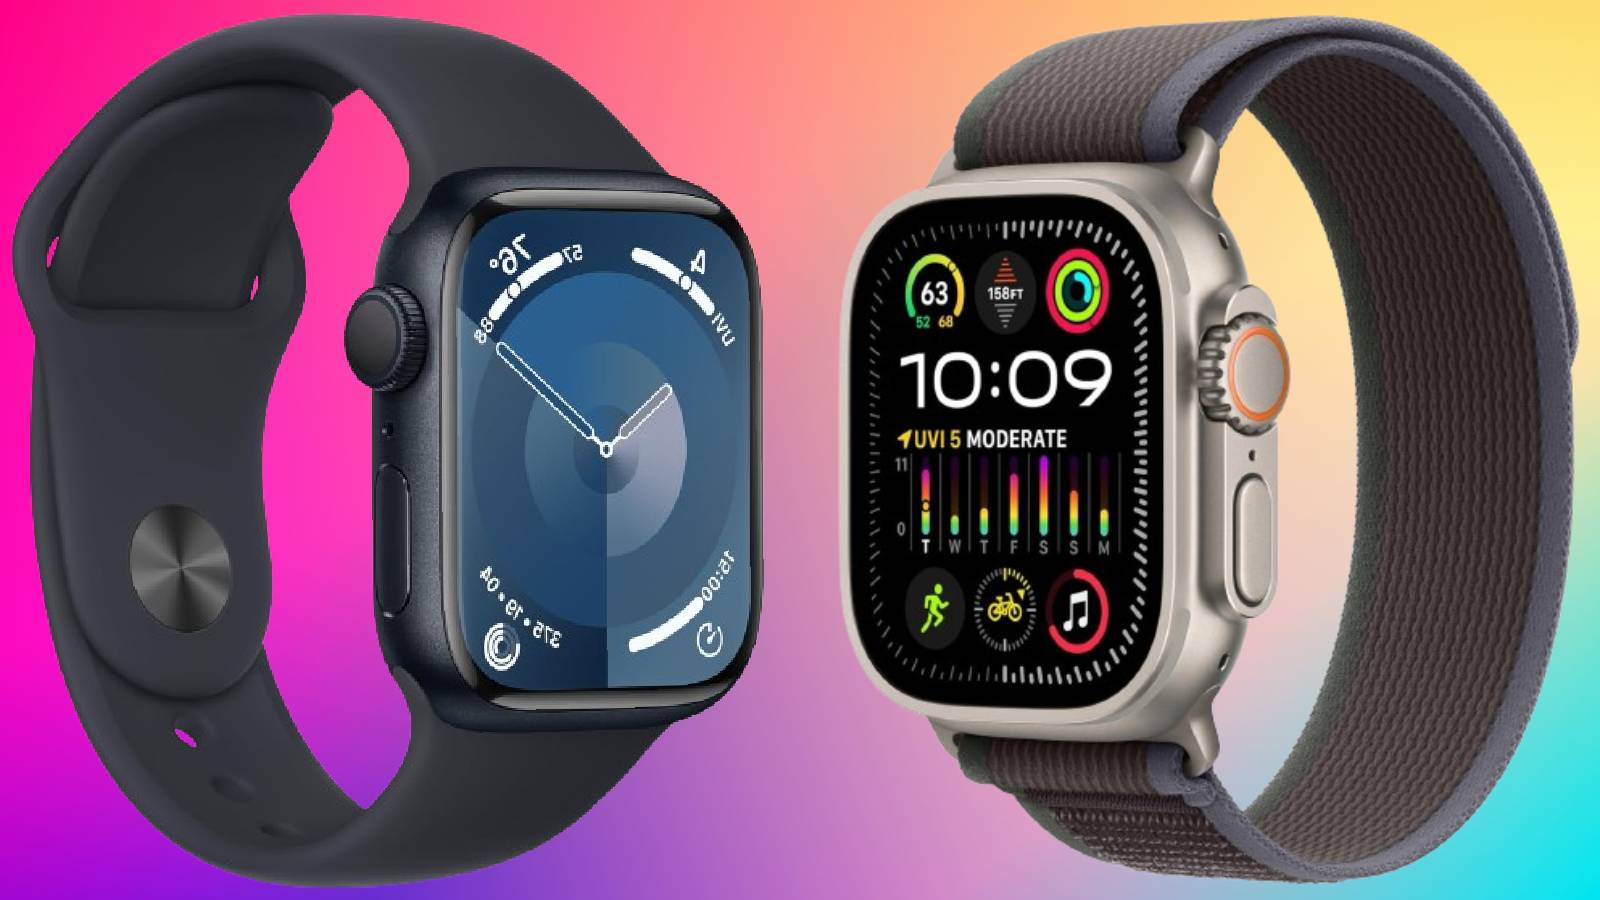 New Apple Watch design might render existing bands useless